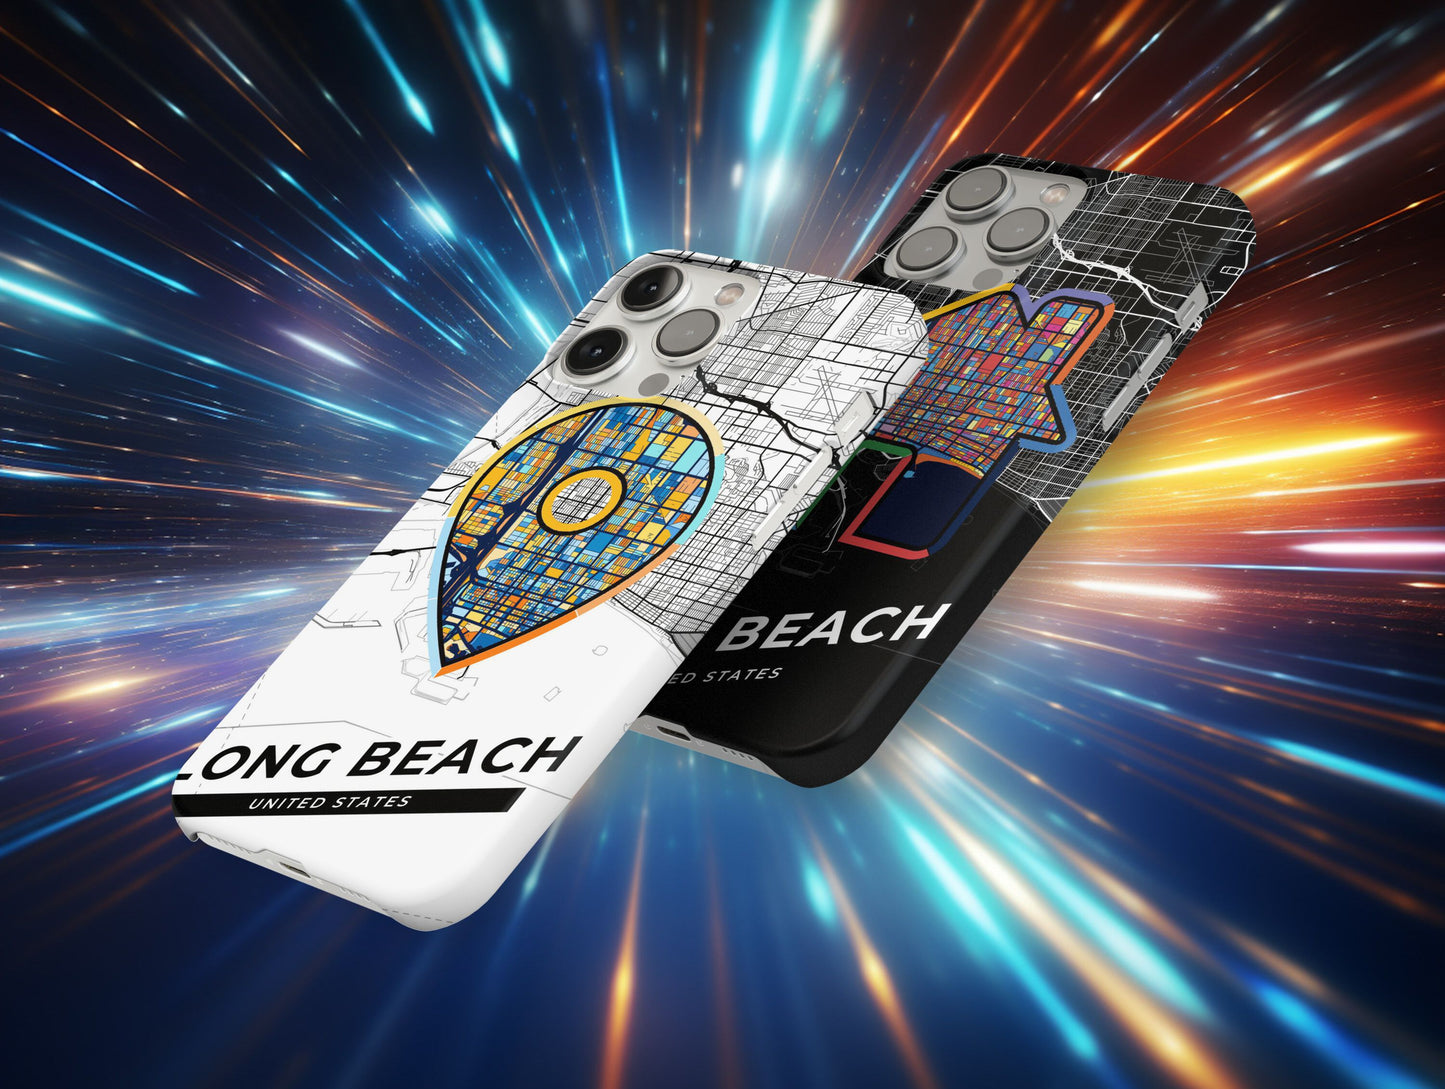 Long Beach California slim phone case with colorful icon. Birthday, wedding or housewarming gift. Couple match cases.